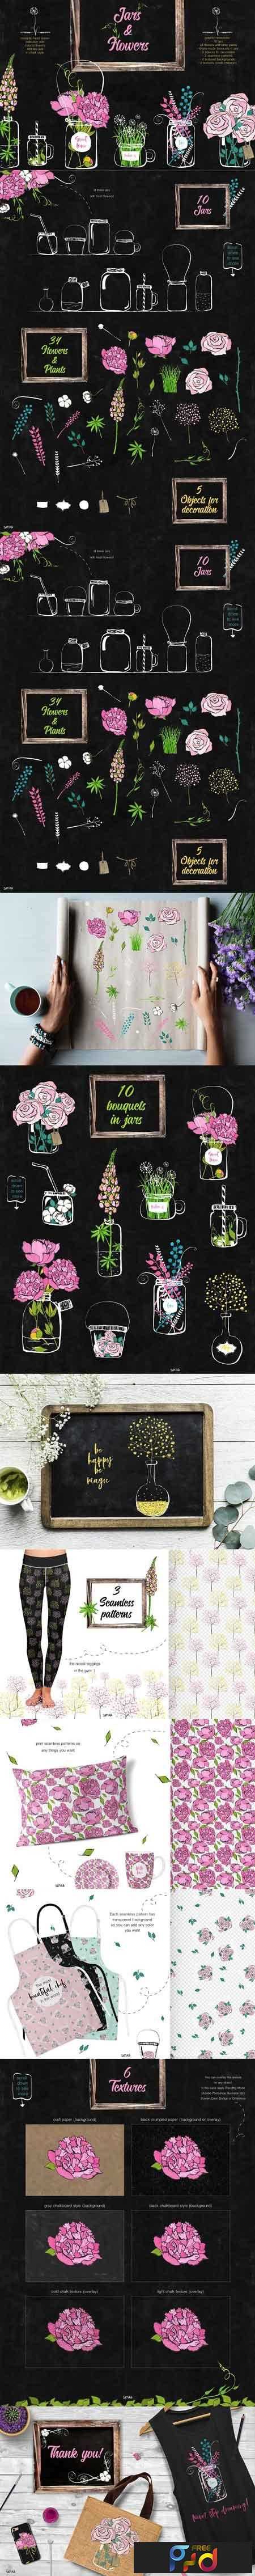 FreePsdVn.com 1810003 STOCK flowers and jars clipart collection 2692627